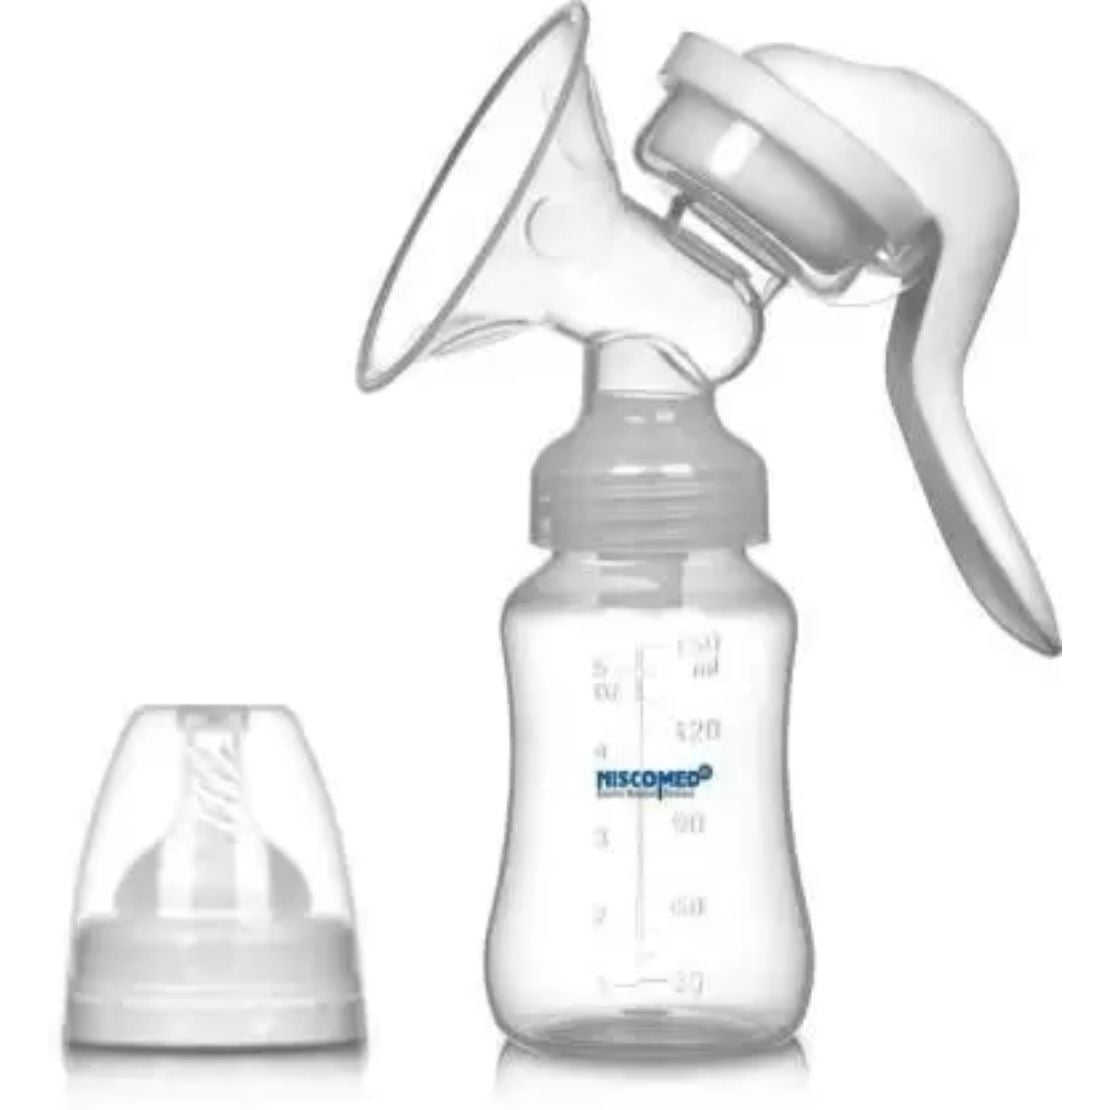 Buy Niscomed Manual Breast Pump for best price in India only at